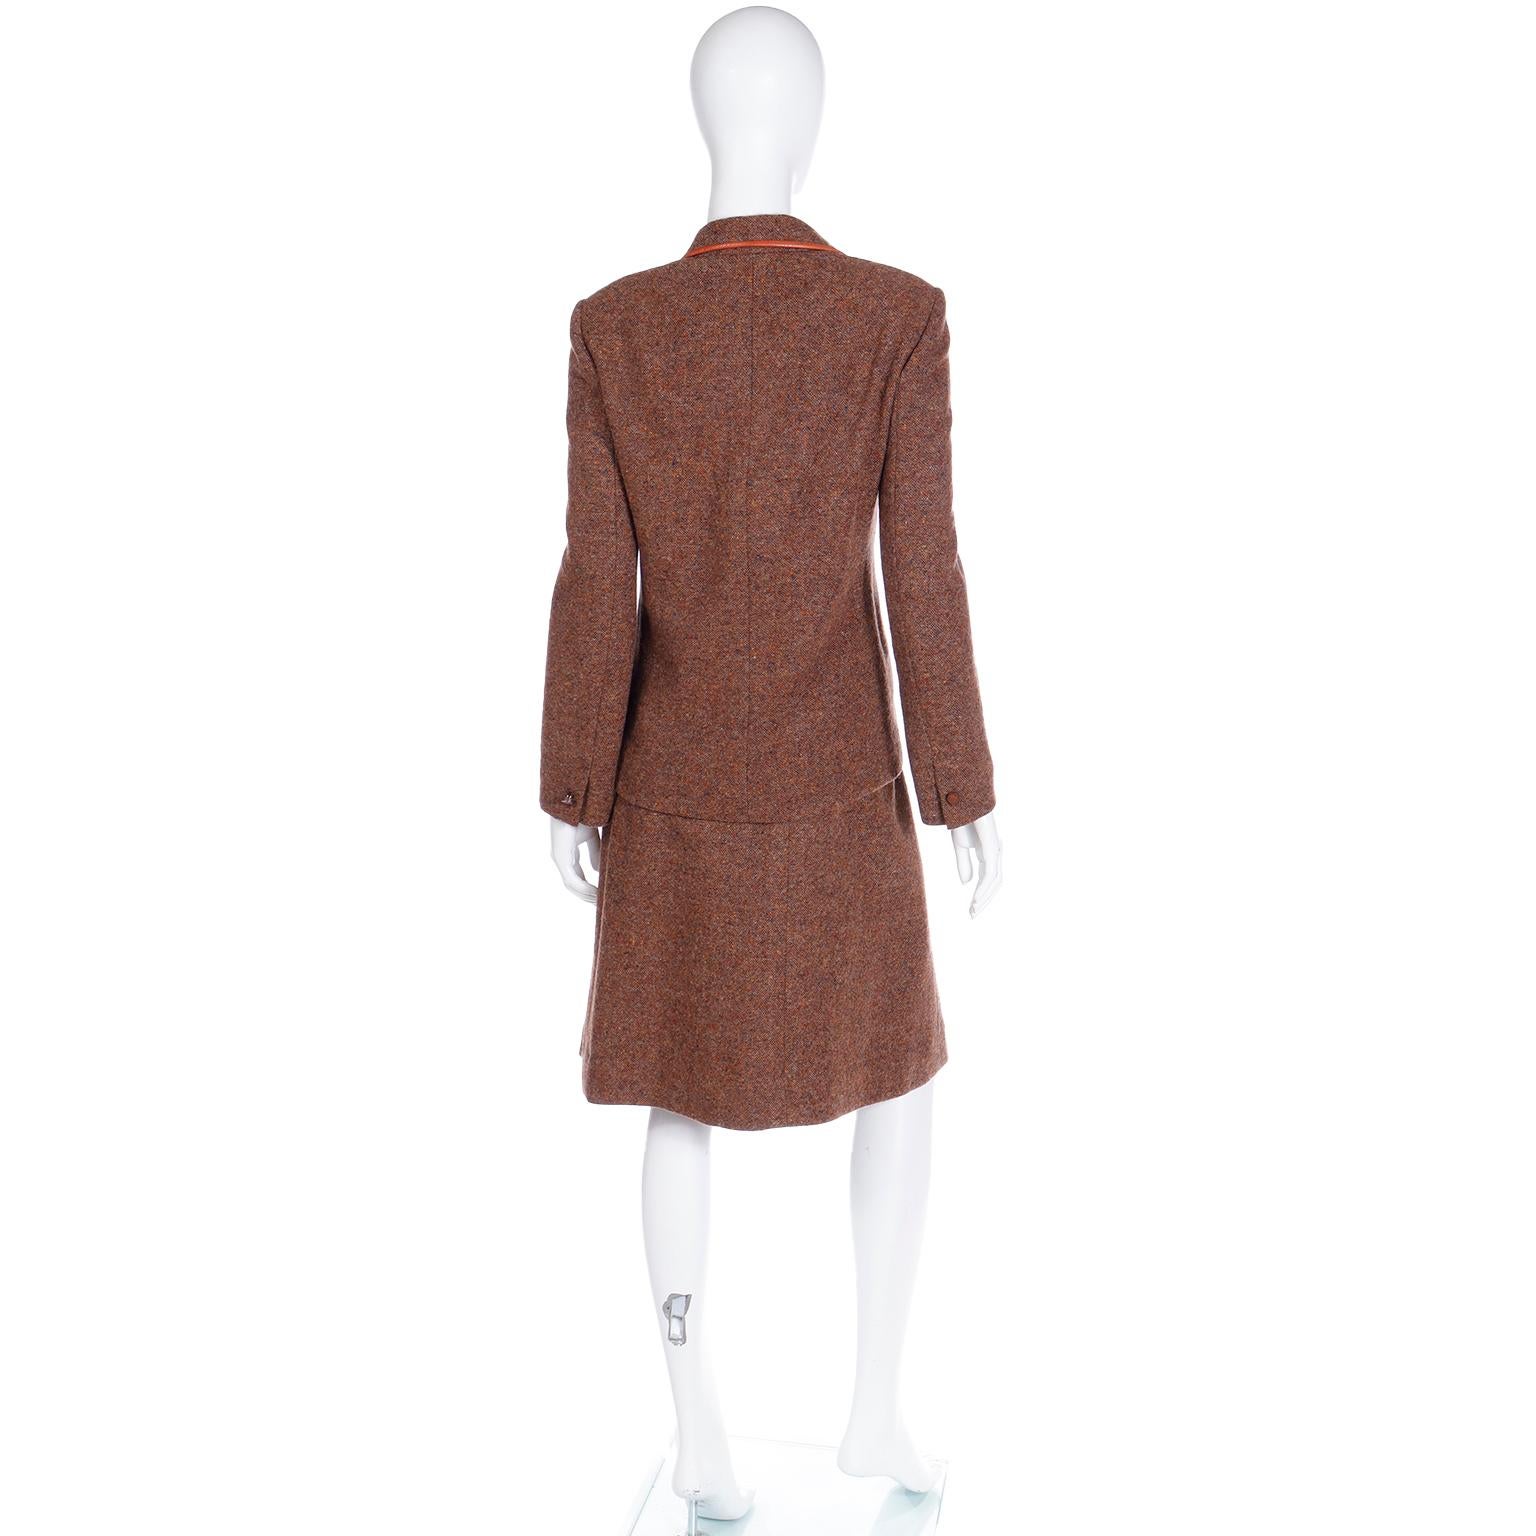 Women's Hermes Vintage 1970s 2pc Jacket & Skirt Suit in Brown Tweed With Leather Trim For Sale